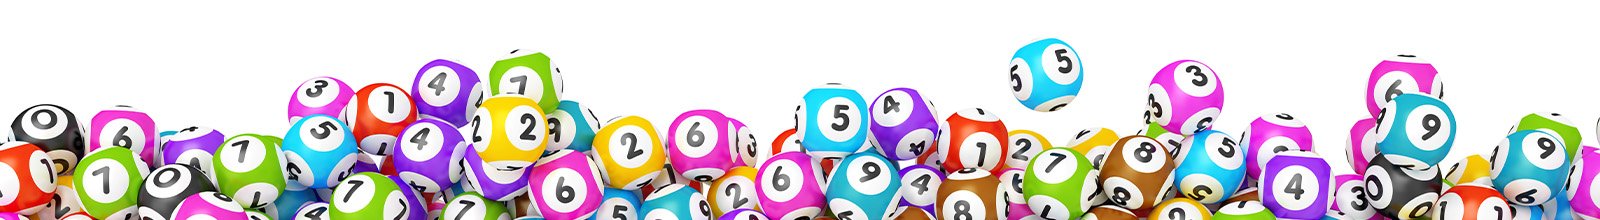 Multicolor lottery balls in white background